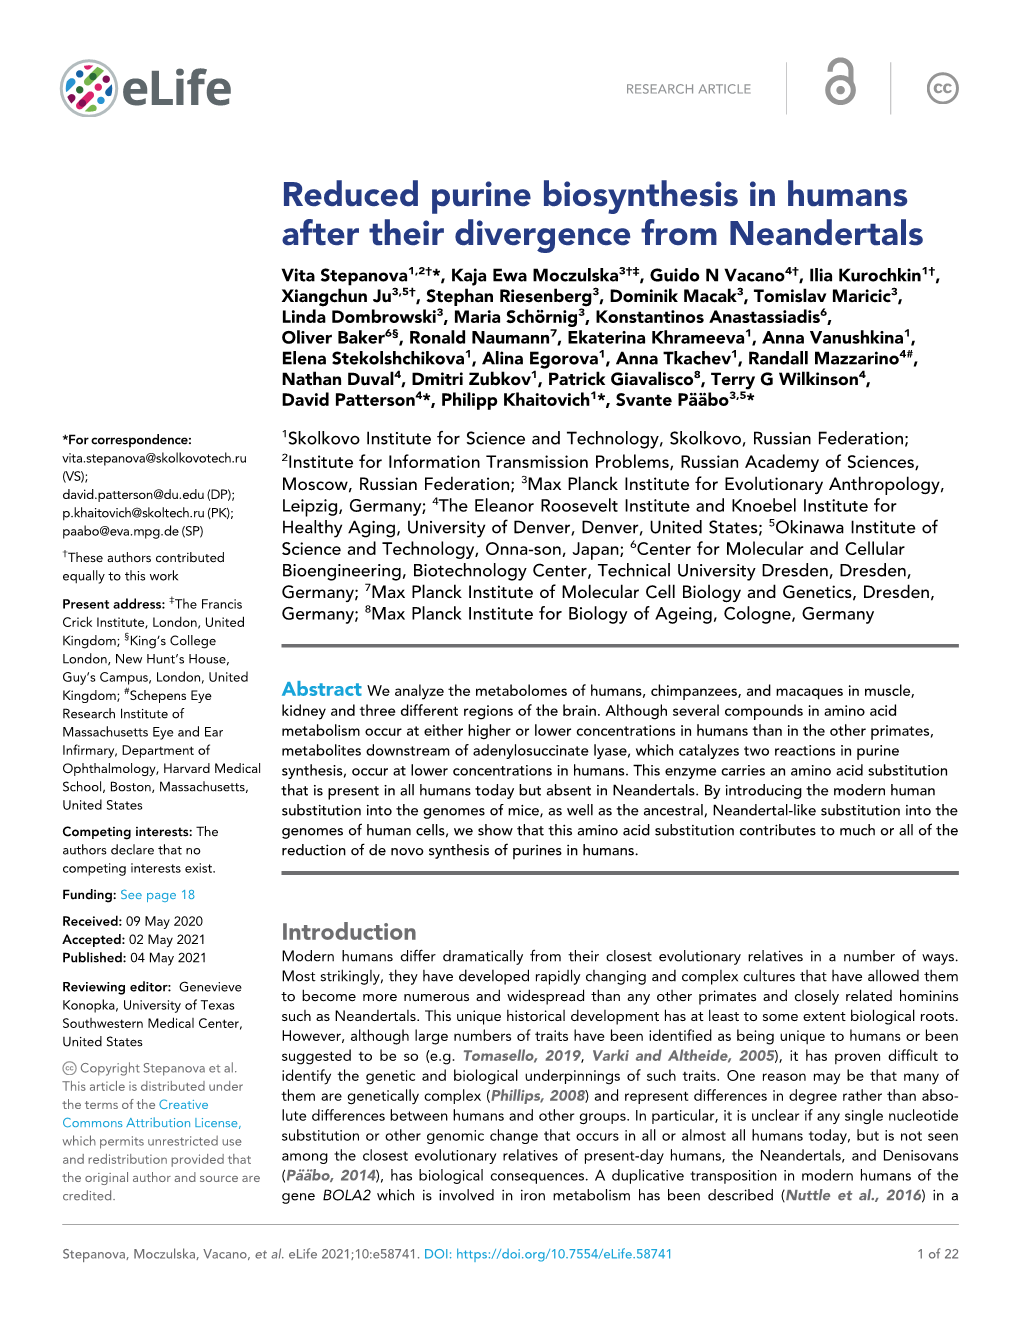 Reduced Purine Biosynthesis in Humans After Their